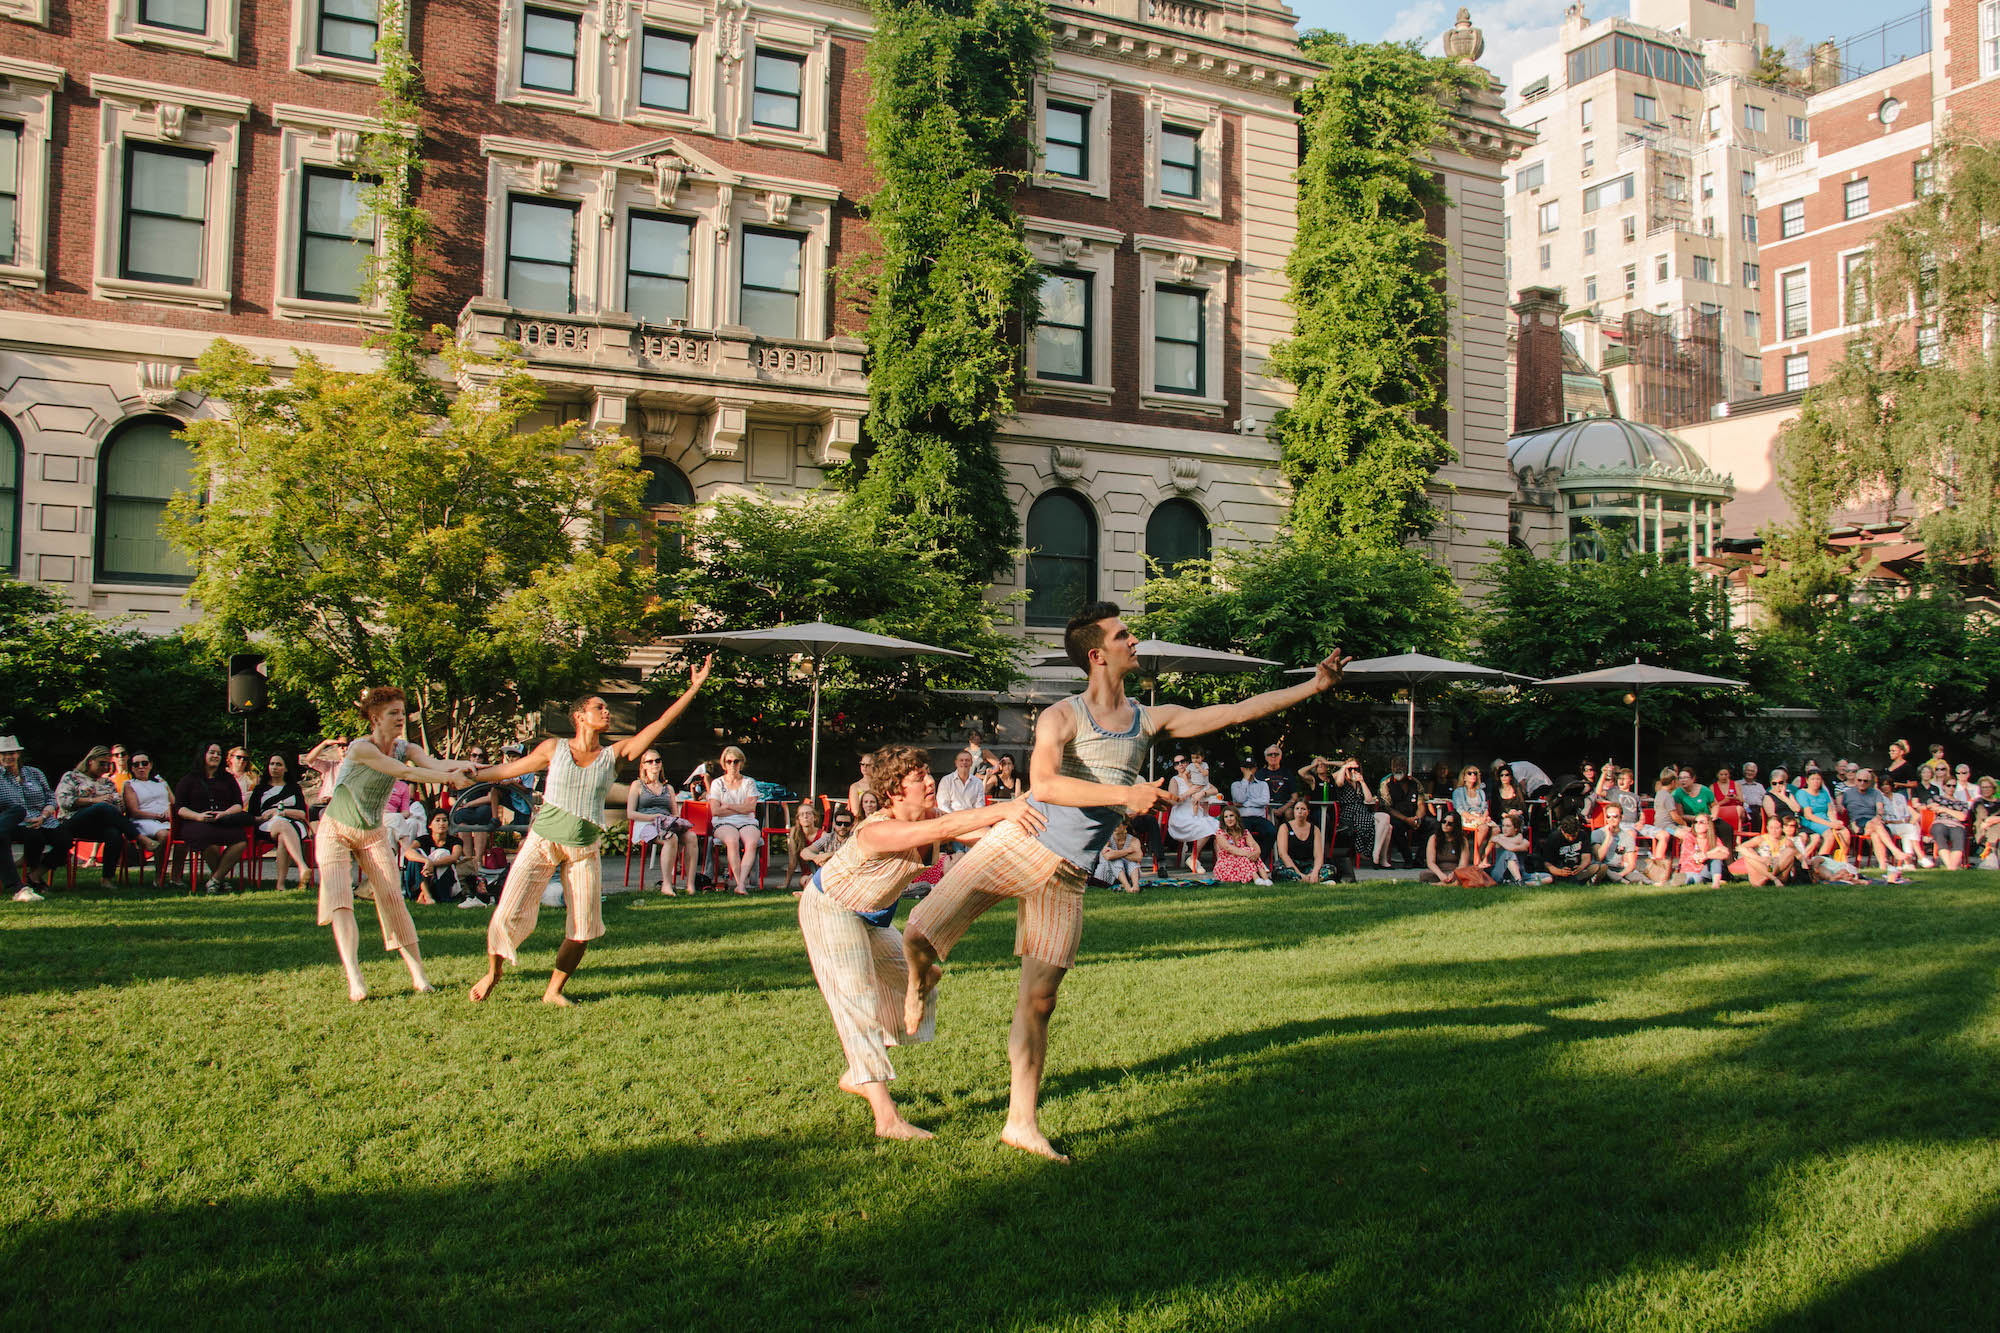 Two pairs of dancers perform on a grass lawn in front of a large mansion. An audience watches from behind, sitting on orange chairs.